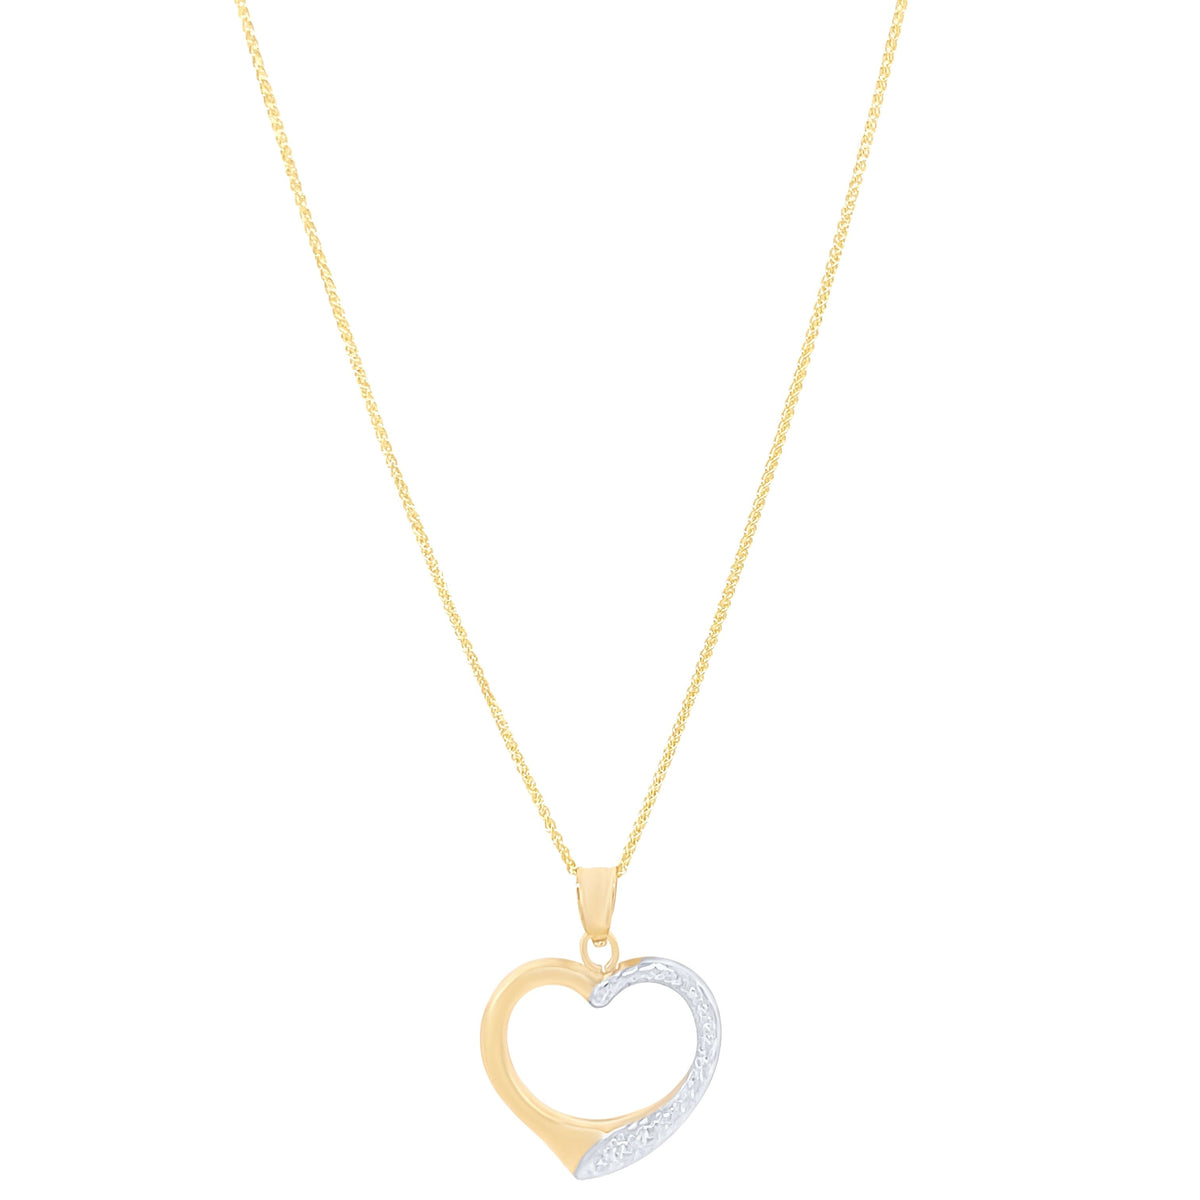 9ct Yellow Gold Two Tone Diamond Cut Heart Shaped Charm Necklaces Bevilles 